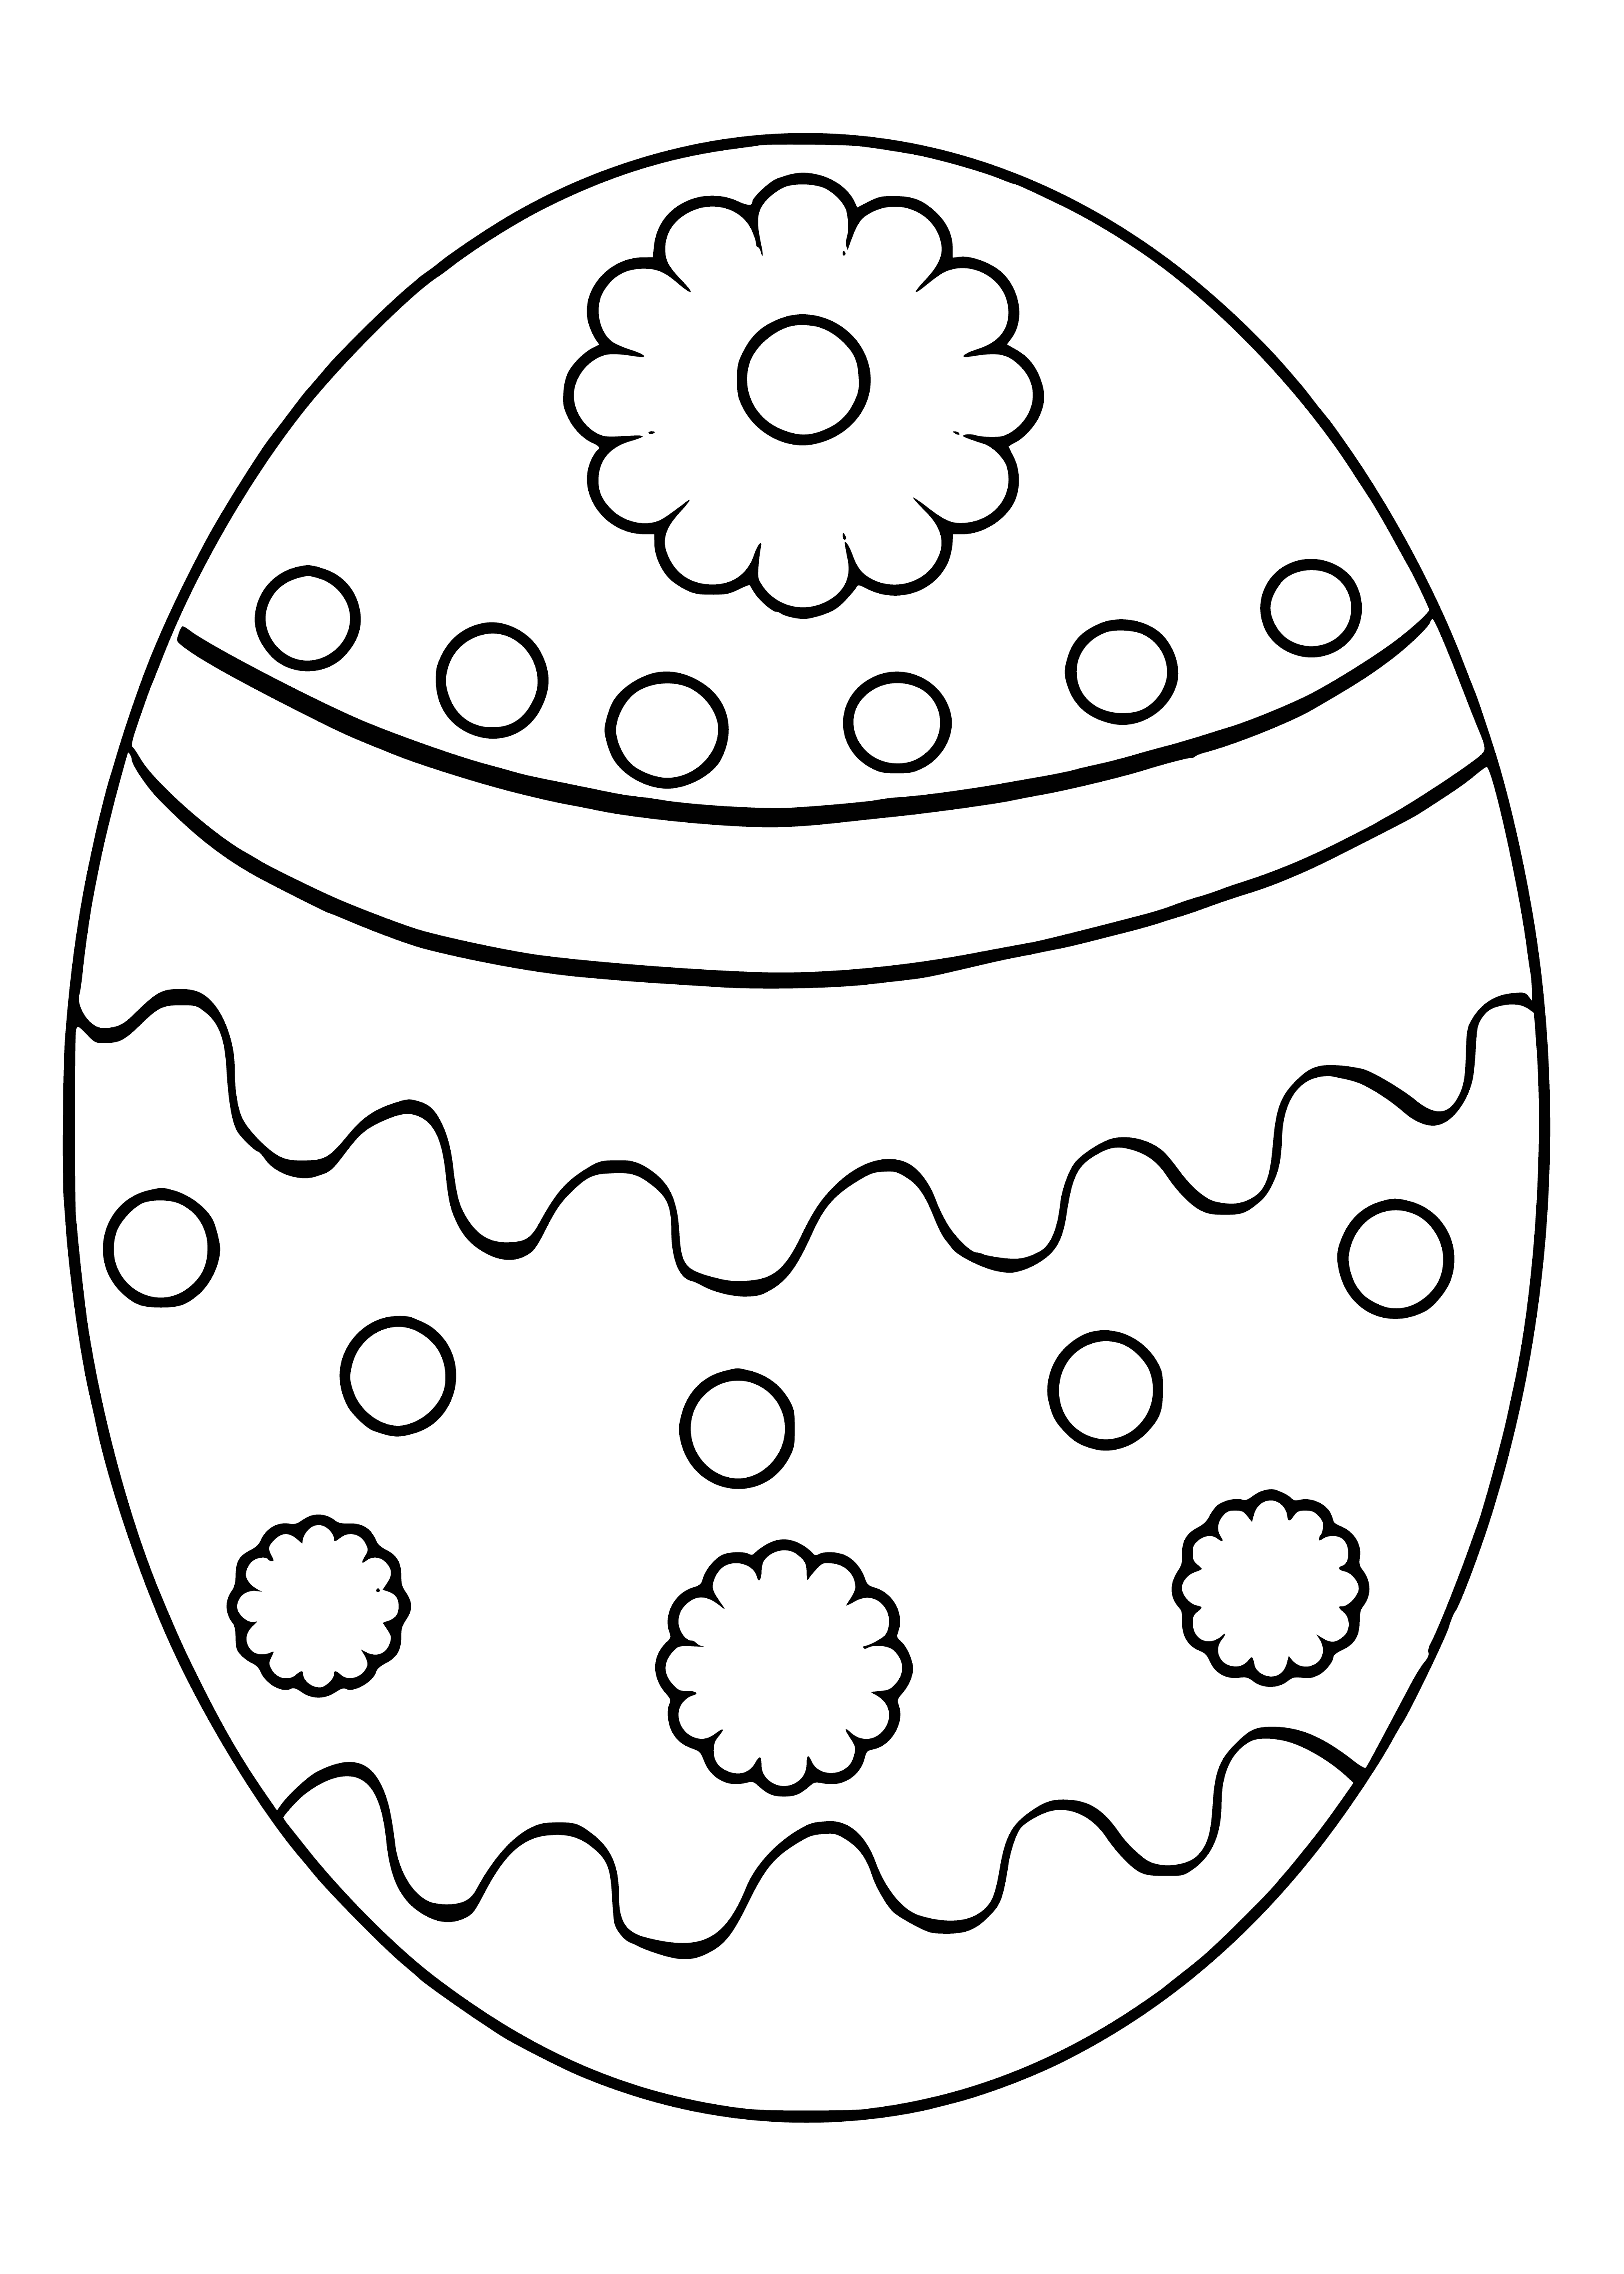 coloring page: Easter egg has a chick on one side, bunny with blue bow tie and basket of eggs on other side. #Easter #springtime